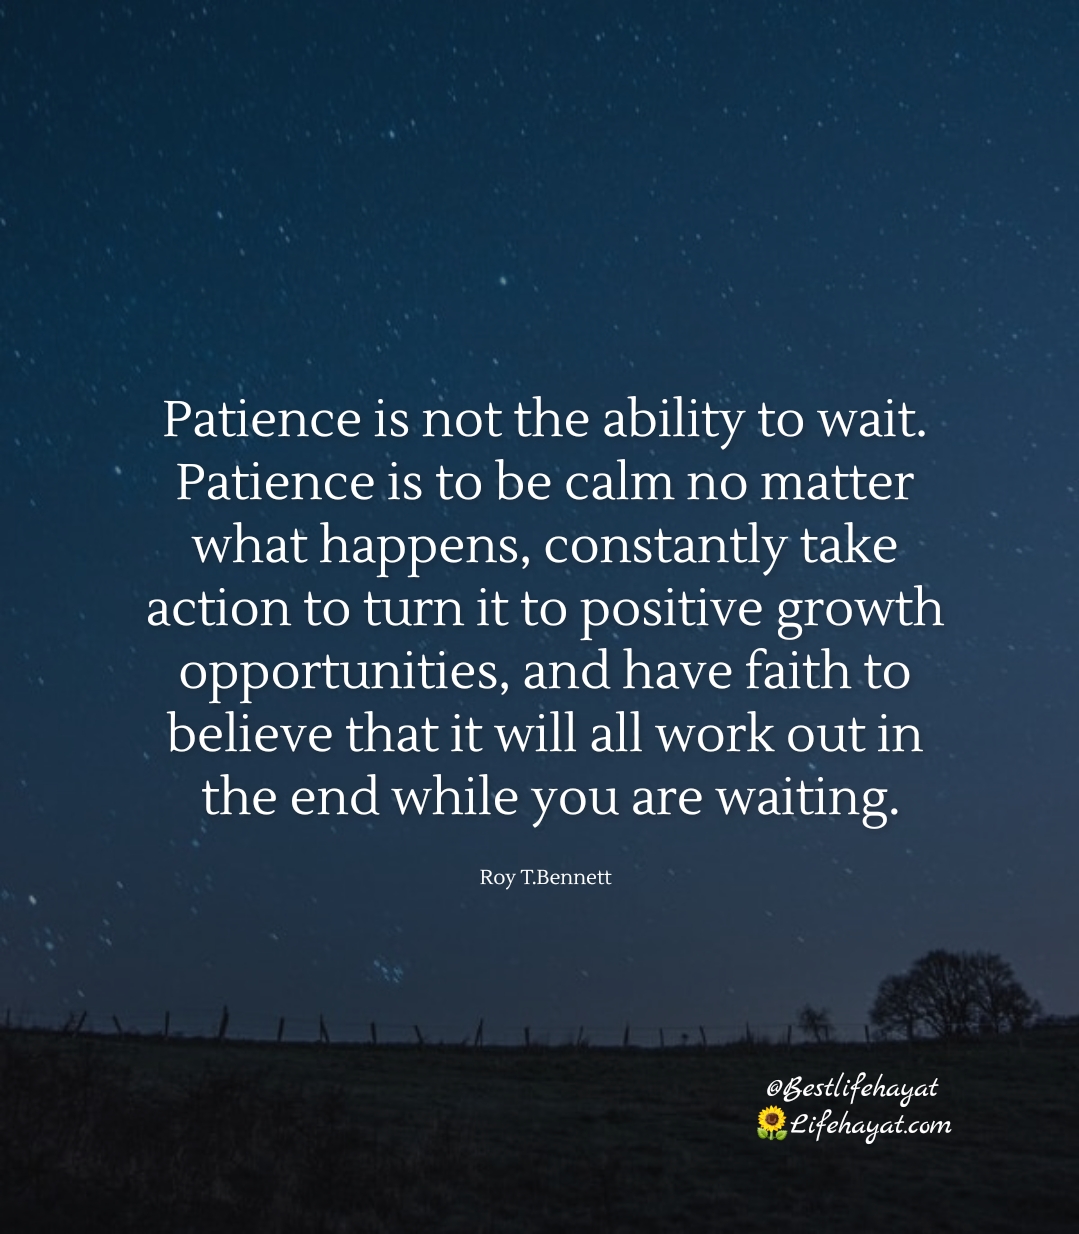 Patience-is-not-the-ability-to-wait